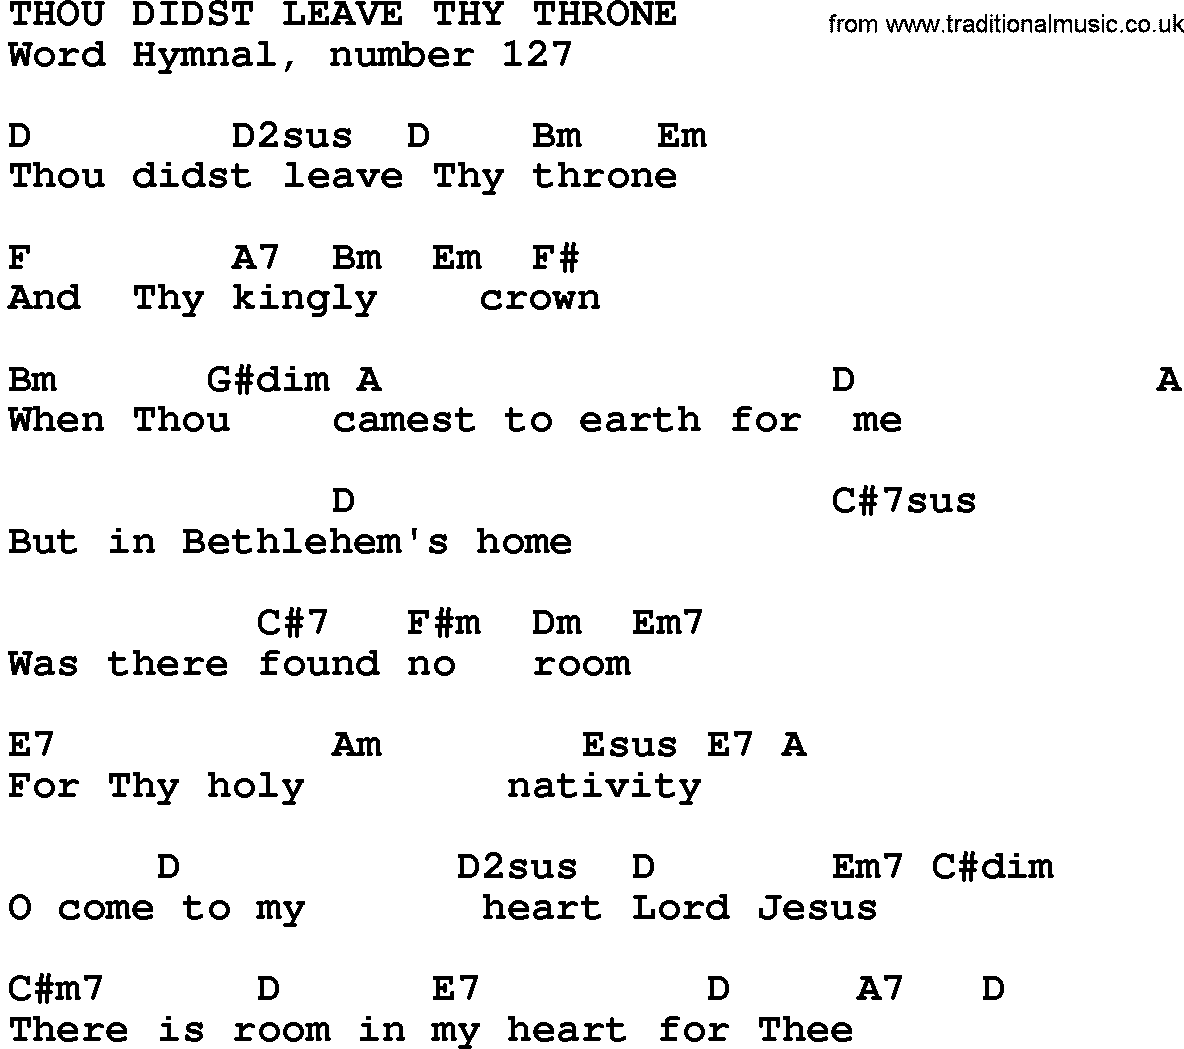 Gospel Song: Thou Didst Leave Thy Throne-Trad, lyrics and chords.